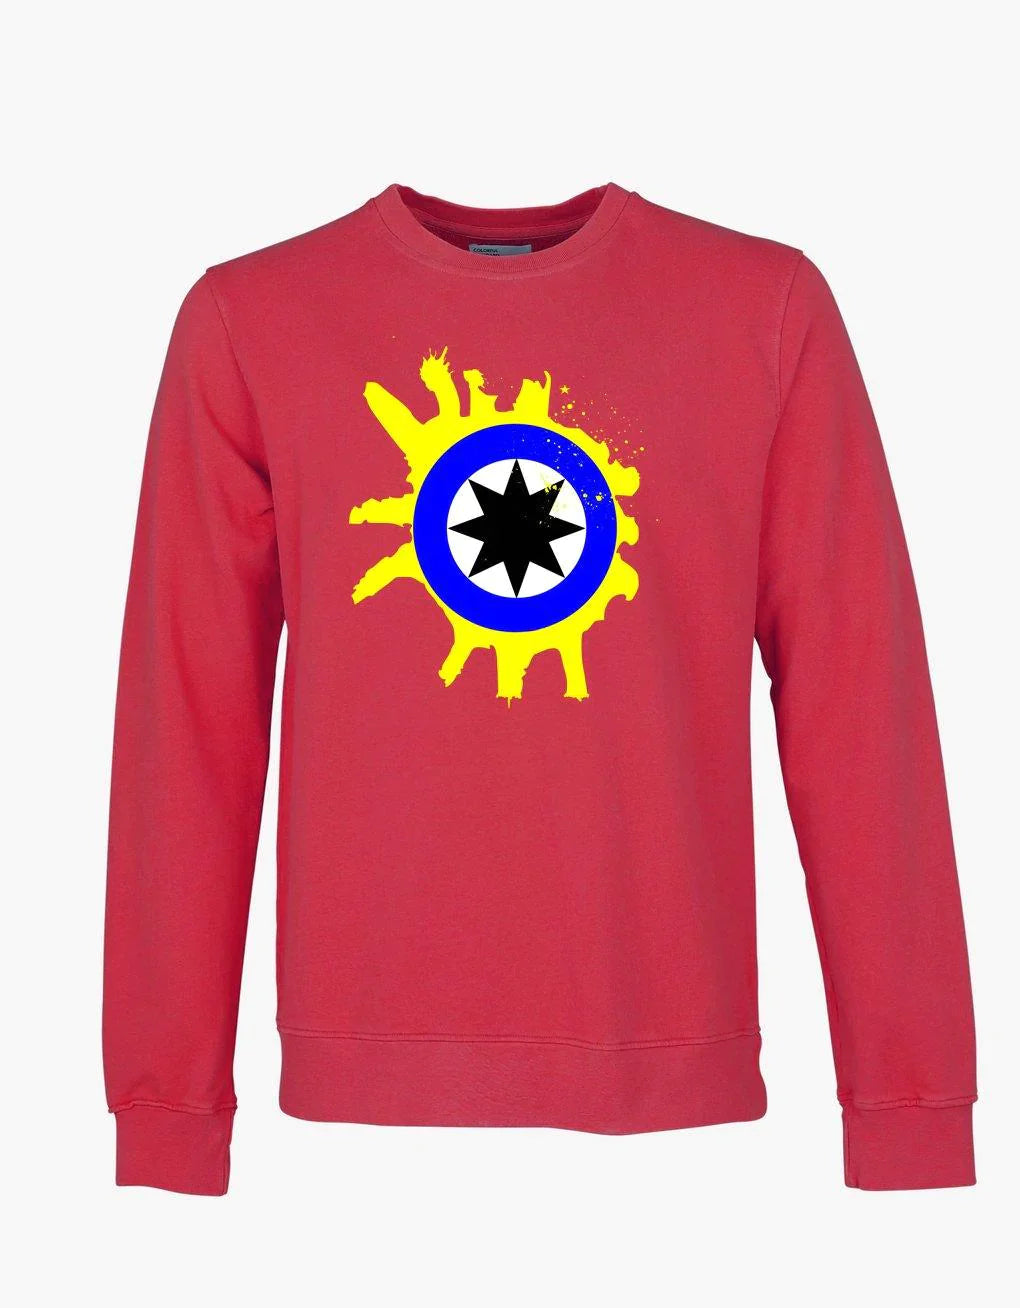 SHINE LIKE STARS (Red): Sweatshirt Inspired by Primal Scream - SOUND IS COLOUR